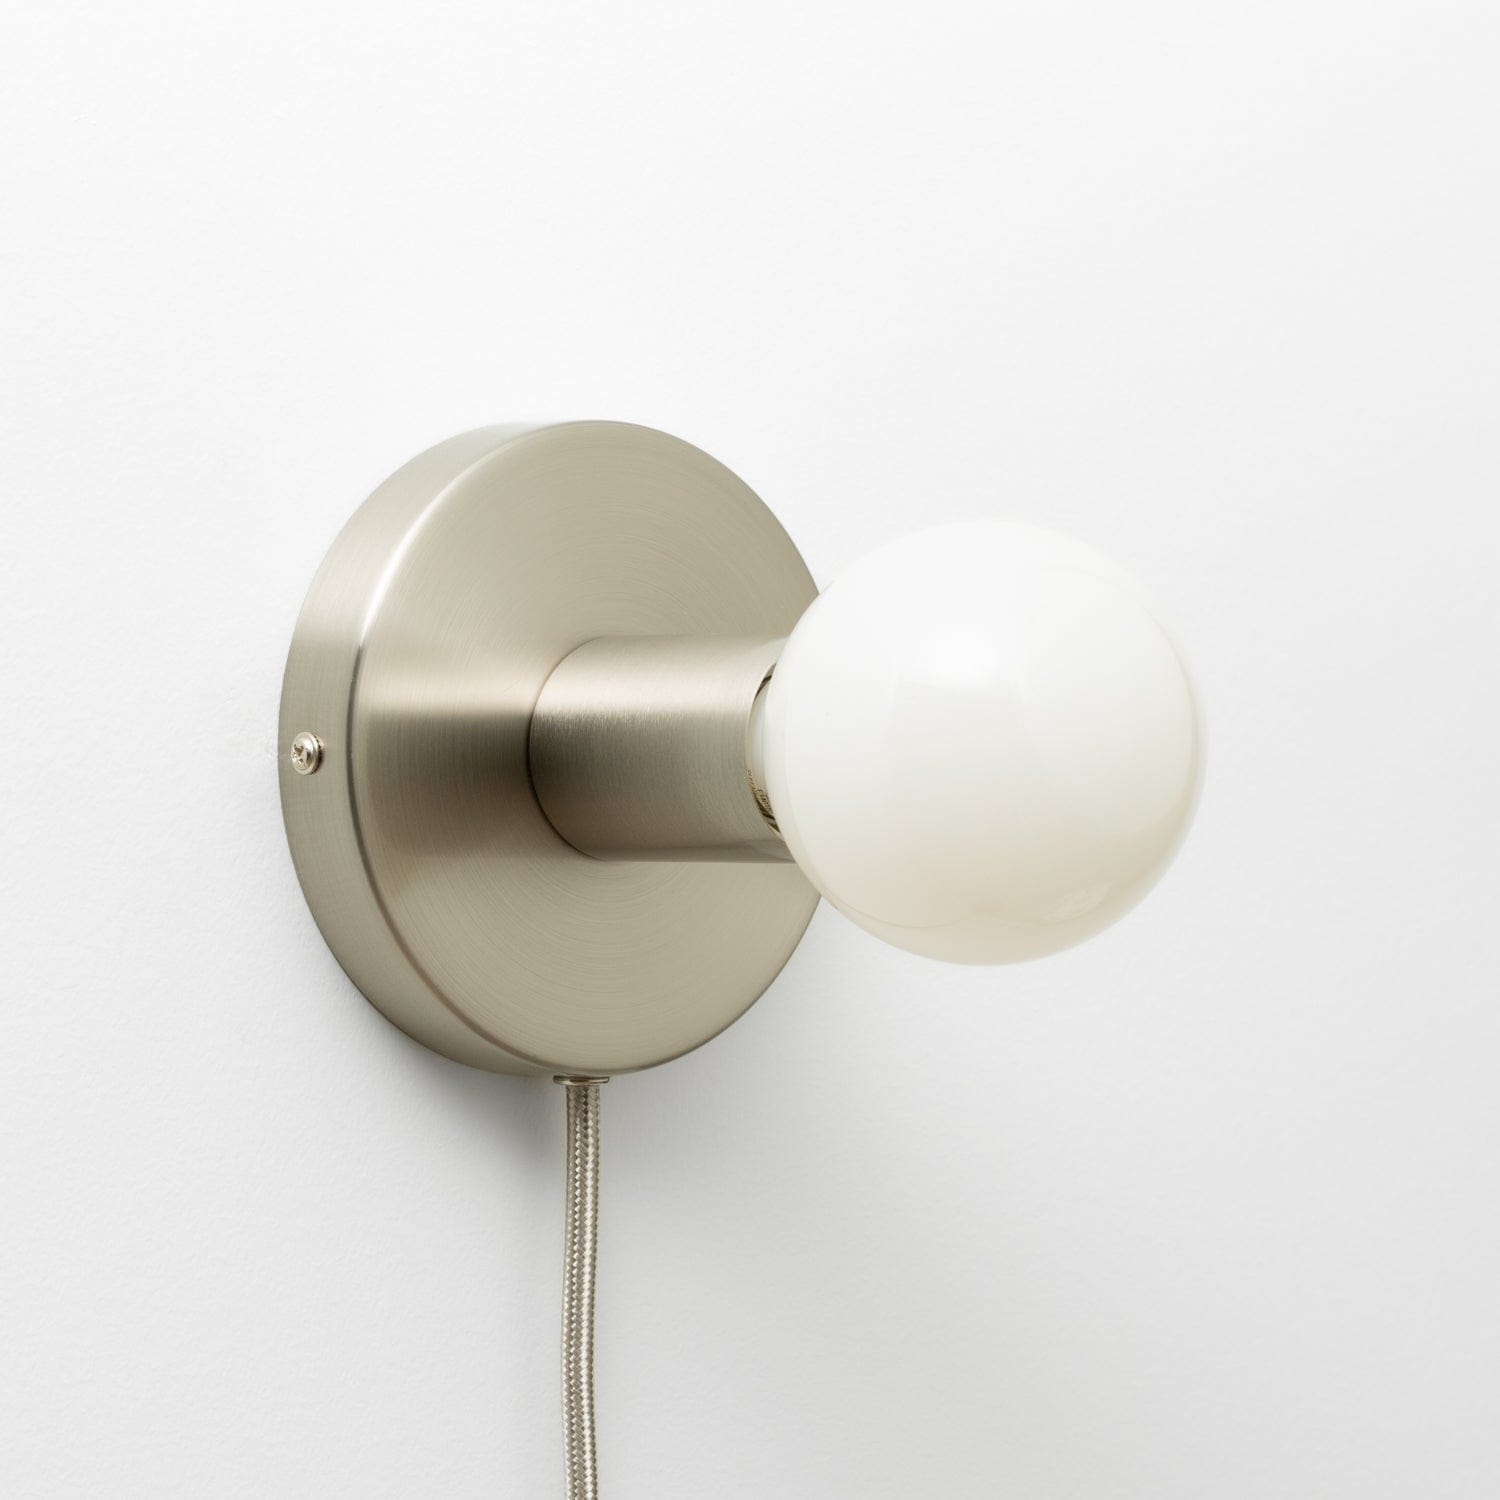 Button Plug-In Sconce in Brushed Nickel finish with G25 light bulb